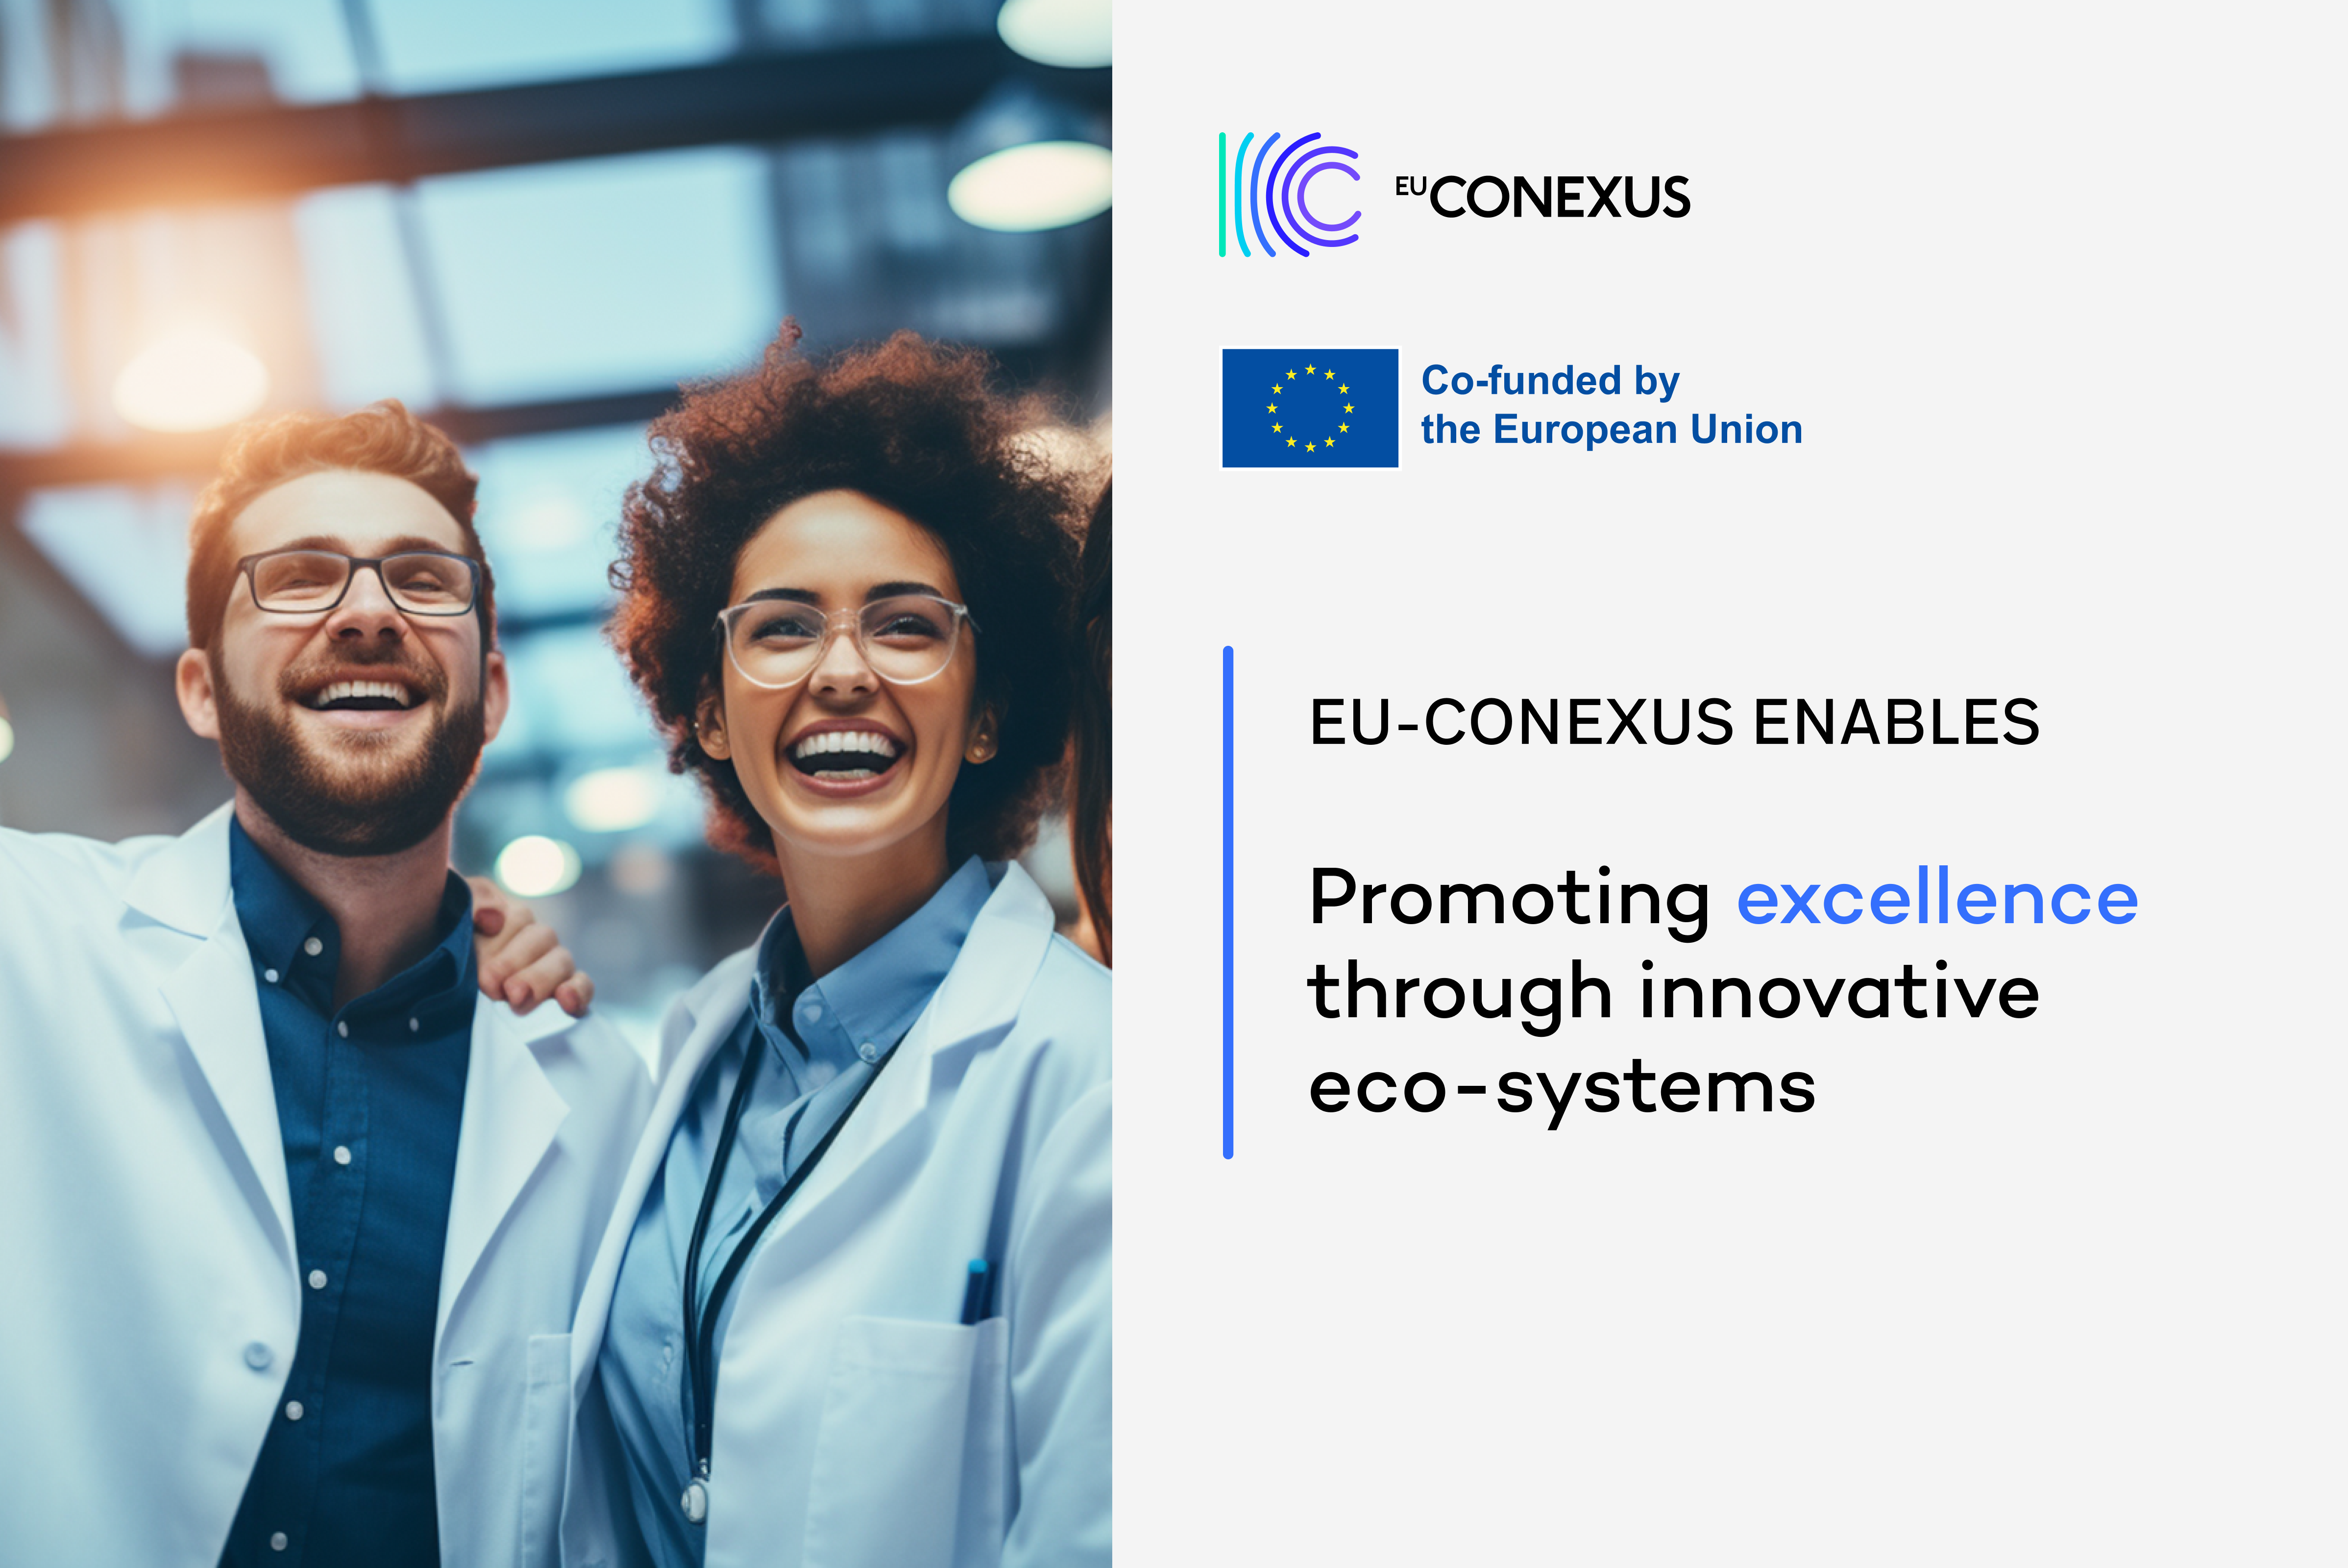 Partners from the Alliance win EU-CONEXUS ENABLES Project, under UTCB lead